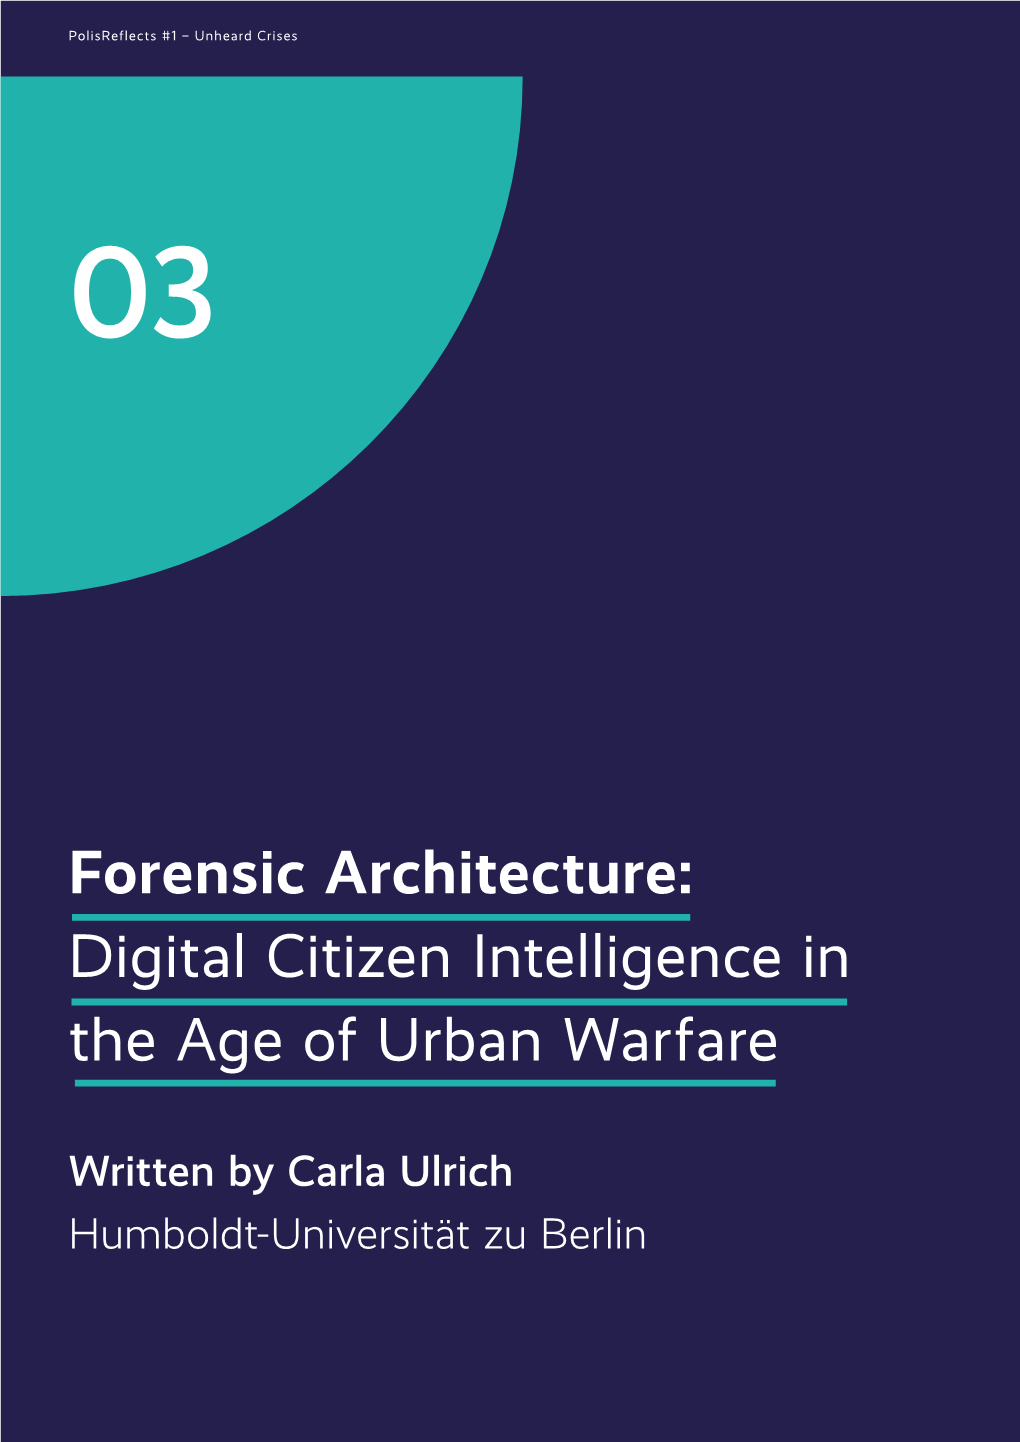 Forensic Architecture: Digital Citizen Intelligence in the Age of Urban Warfare